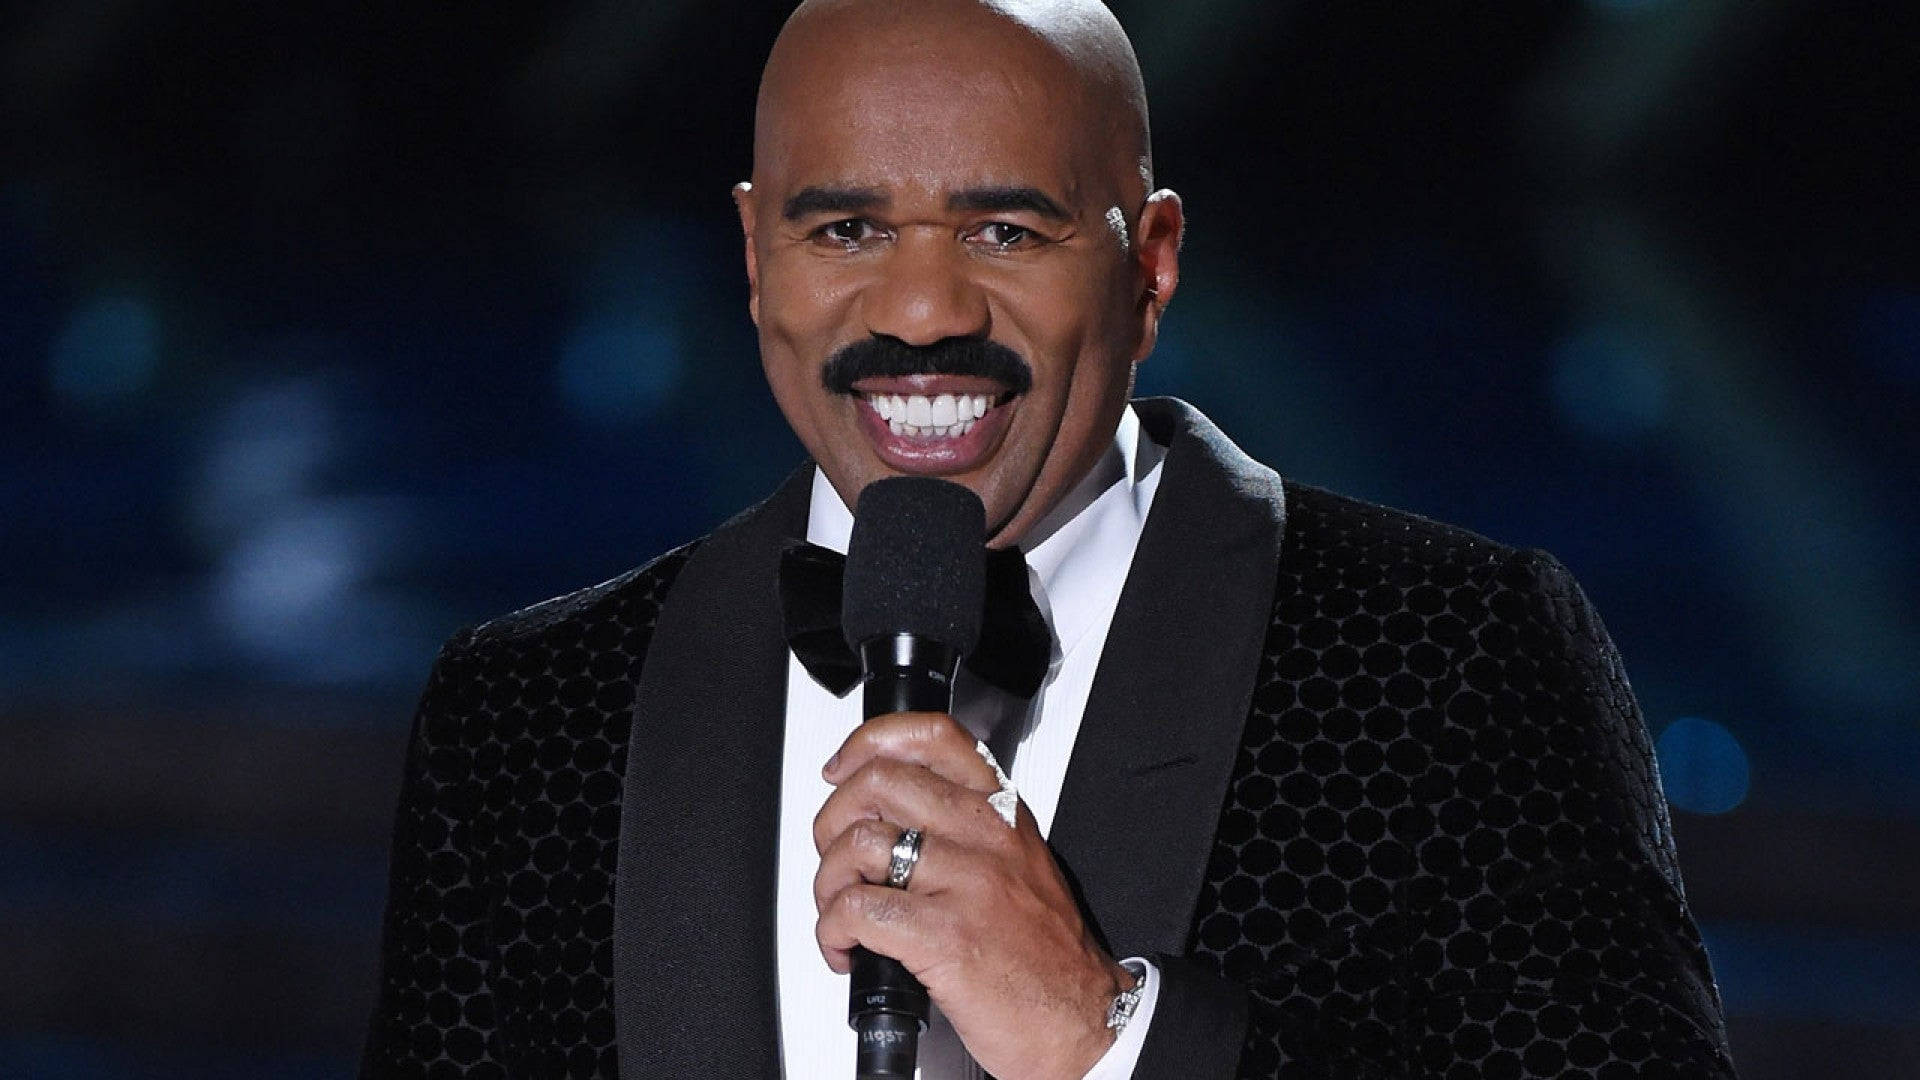 Steve Harvey laughing with Microphone Wallpaper